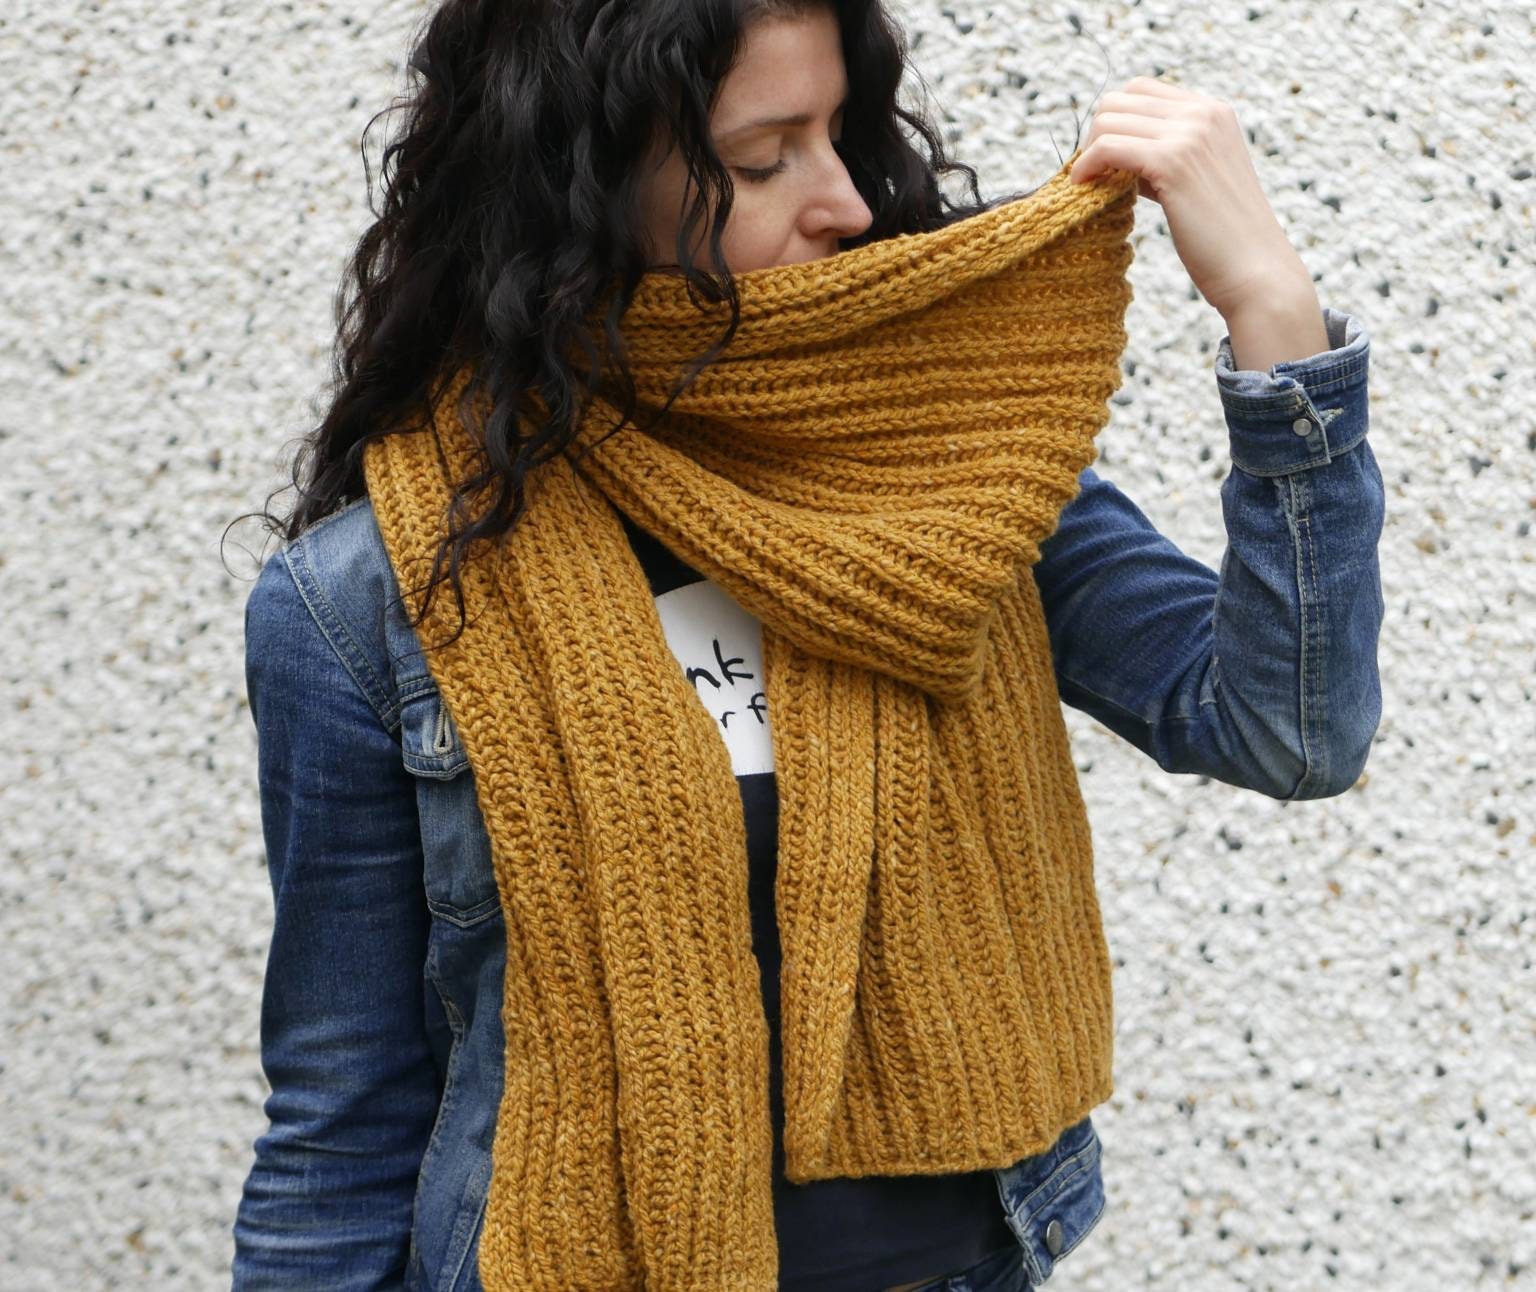 Extra Long Scarf, Oversized Knit Scarf, Lenny Inspired Scarf